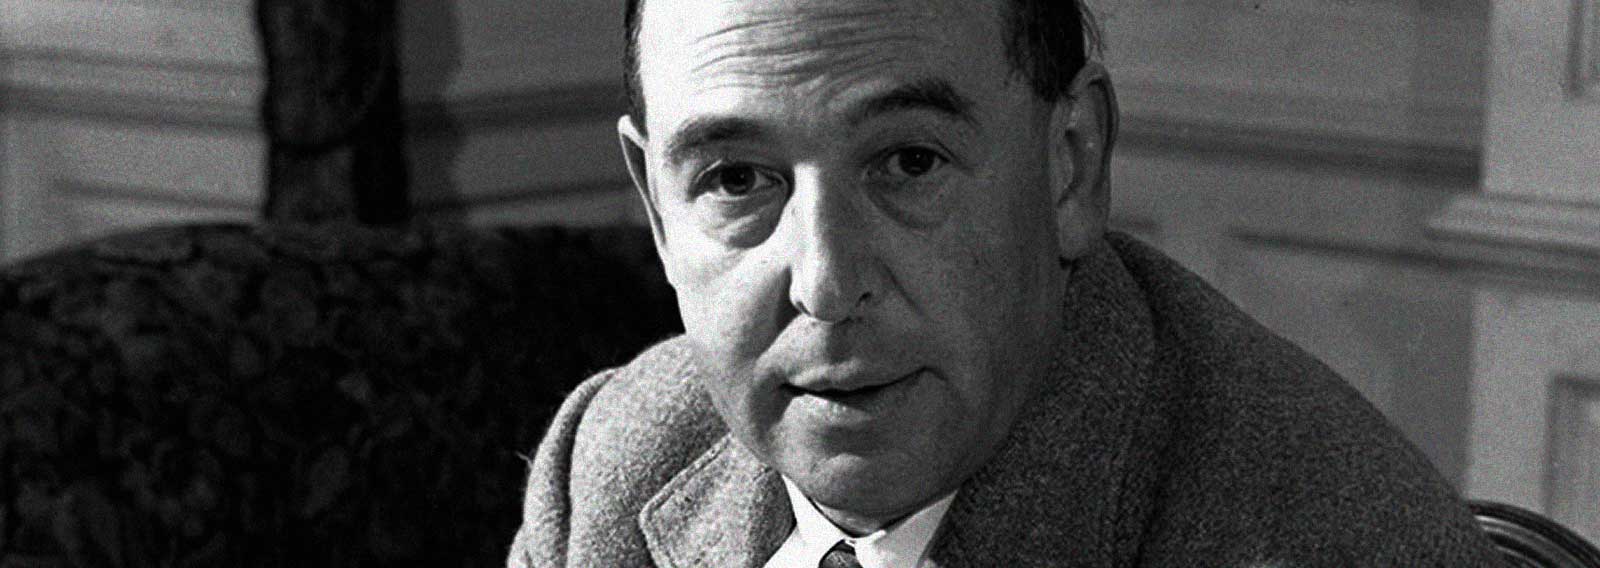 C.S. Lewis Sounded the Alarm, but We Paid No Heed